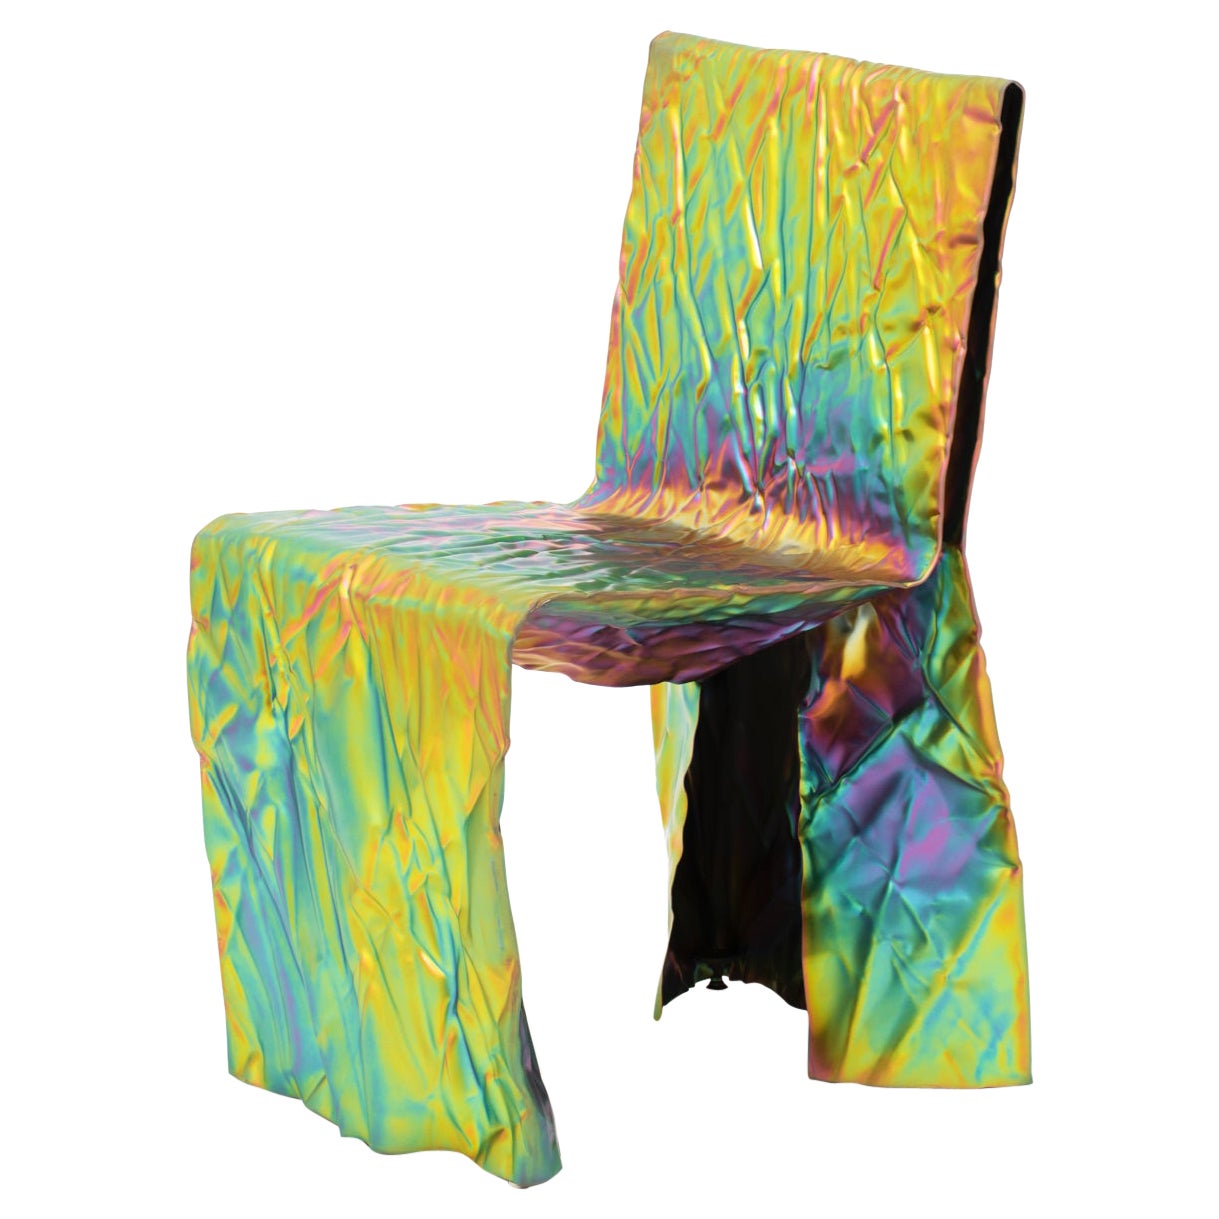 Christopher Prinz “Wrinkled Chair” in Rainbow Iridescent 'Raw'